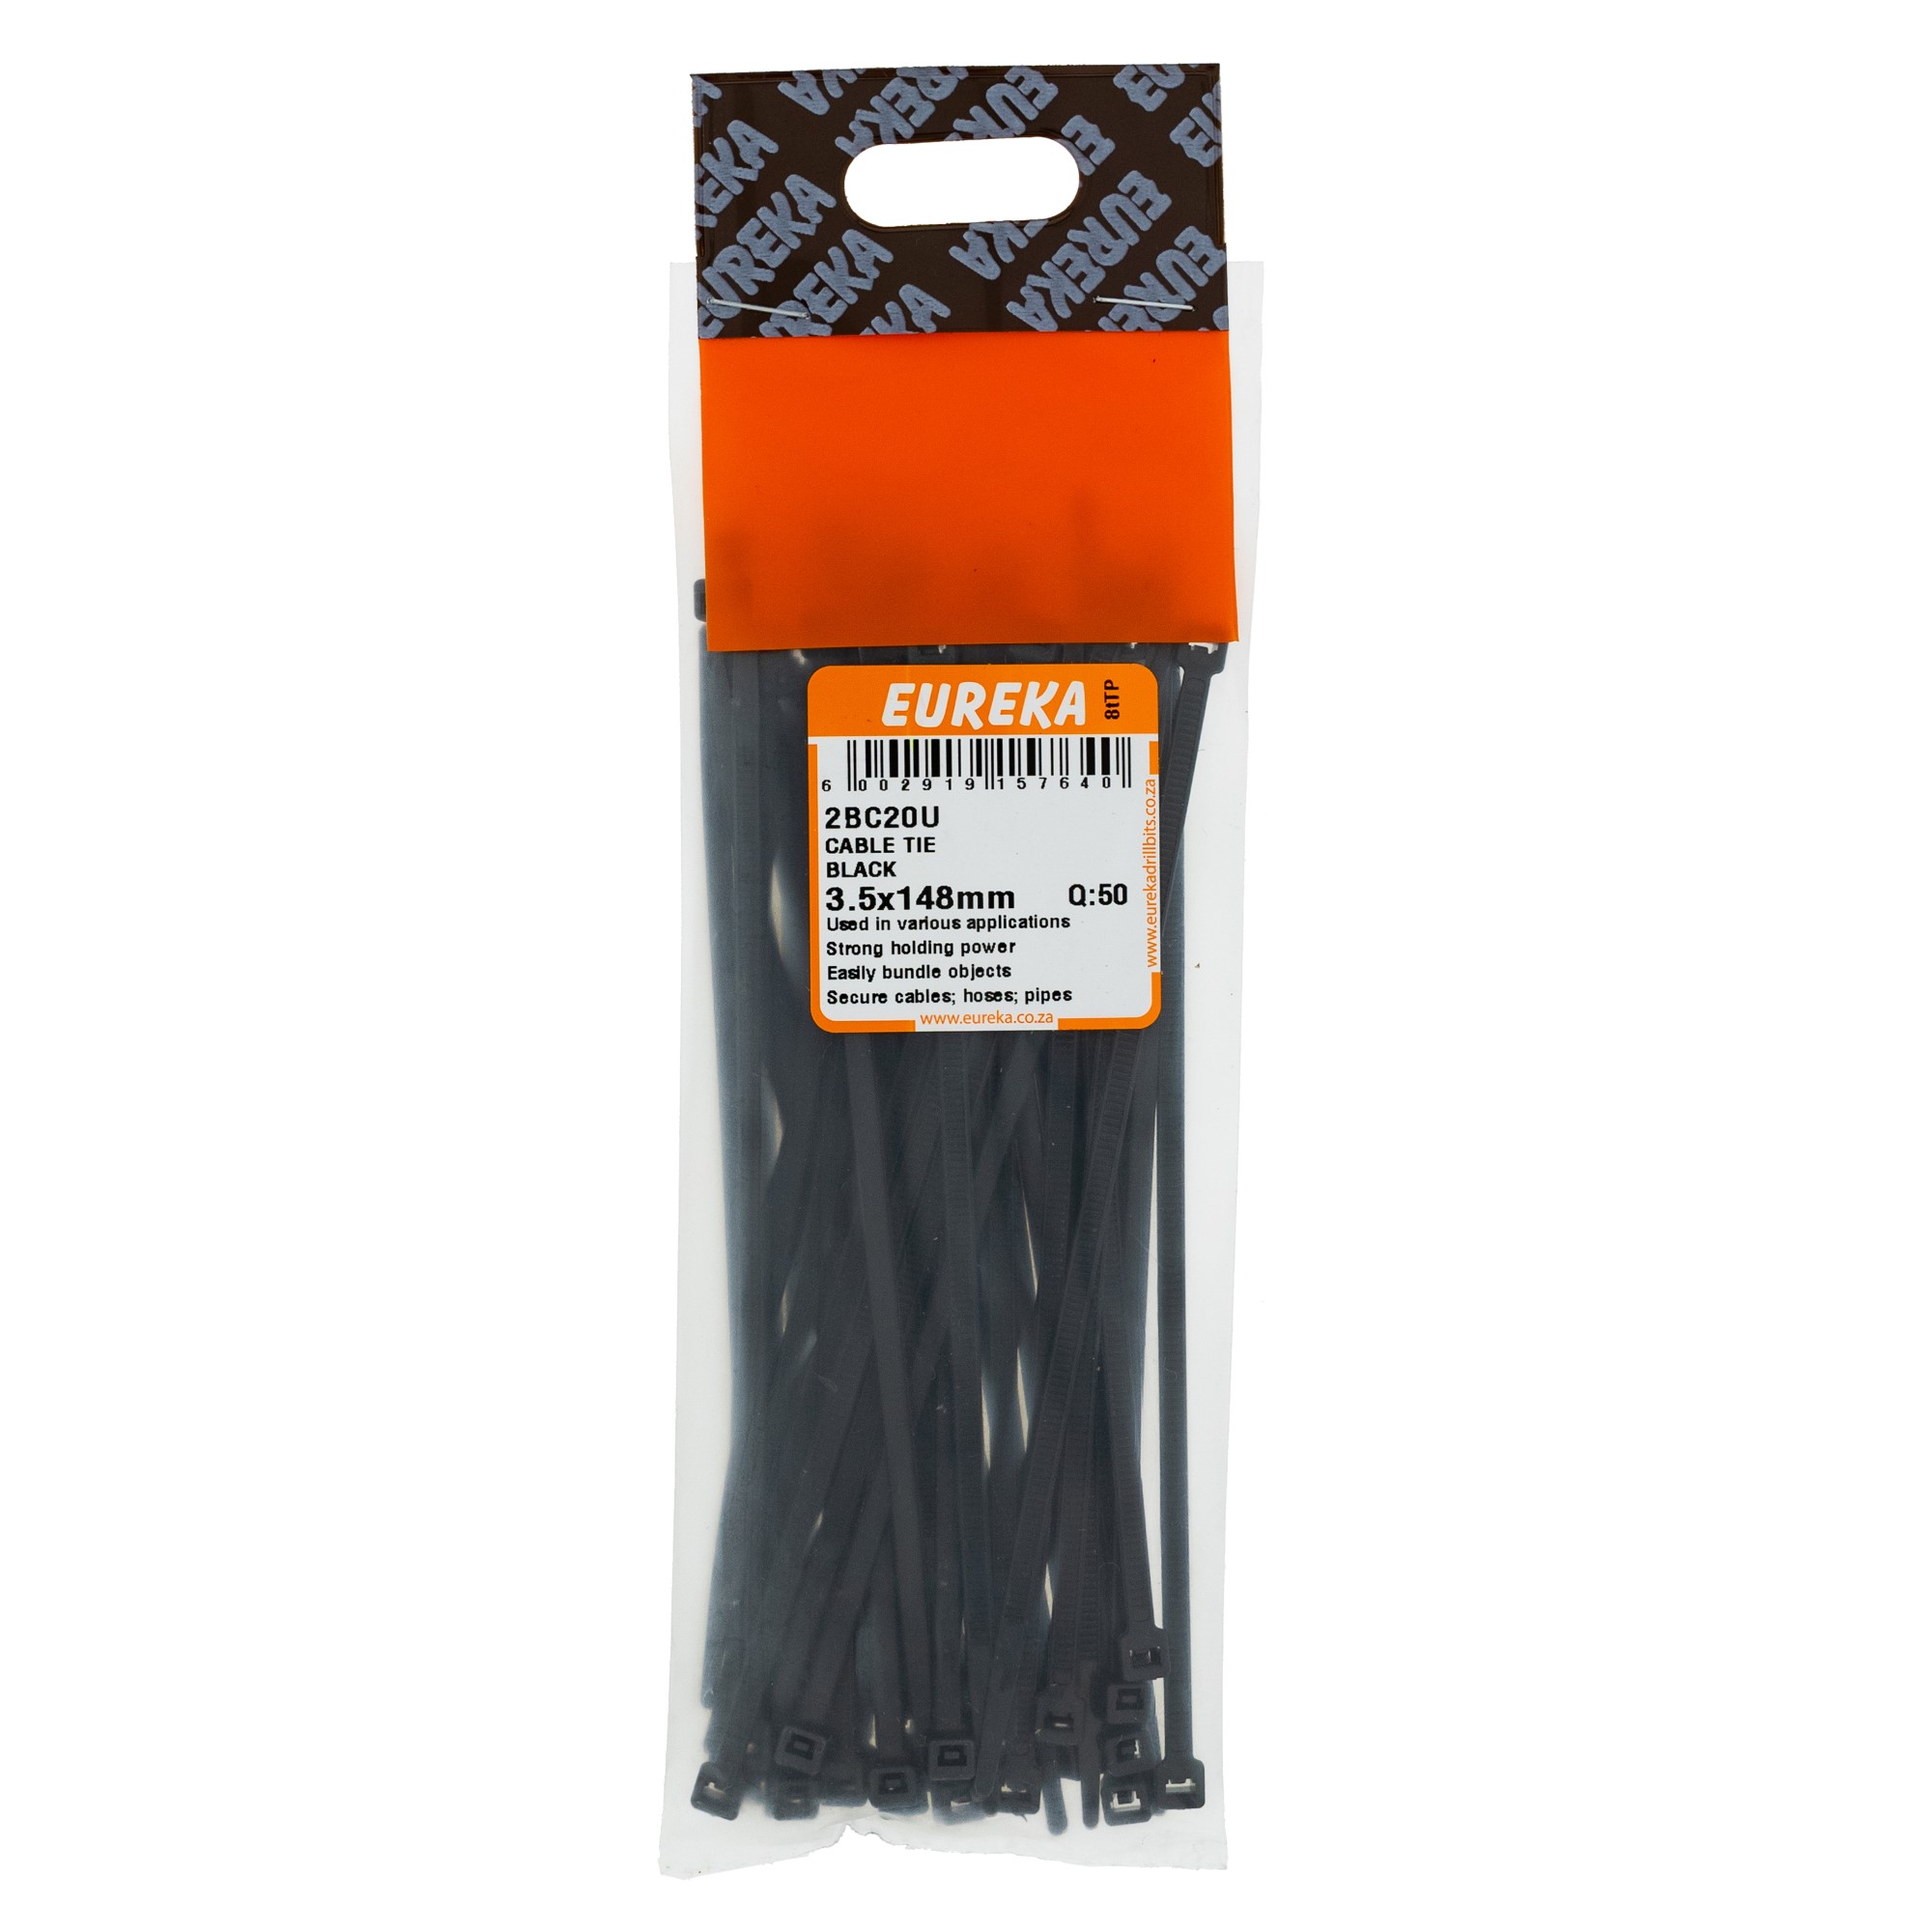 Cable Tie Black 3.5x148mm QTY50